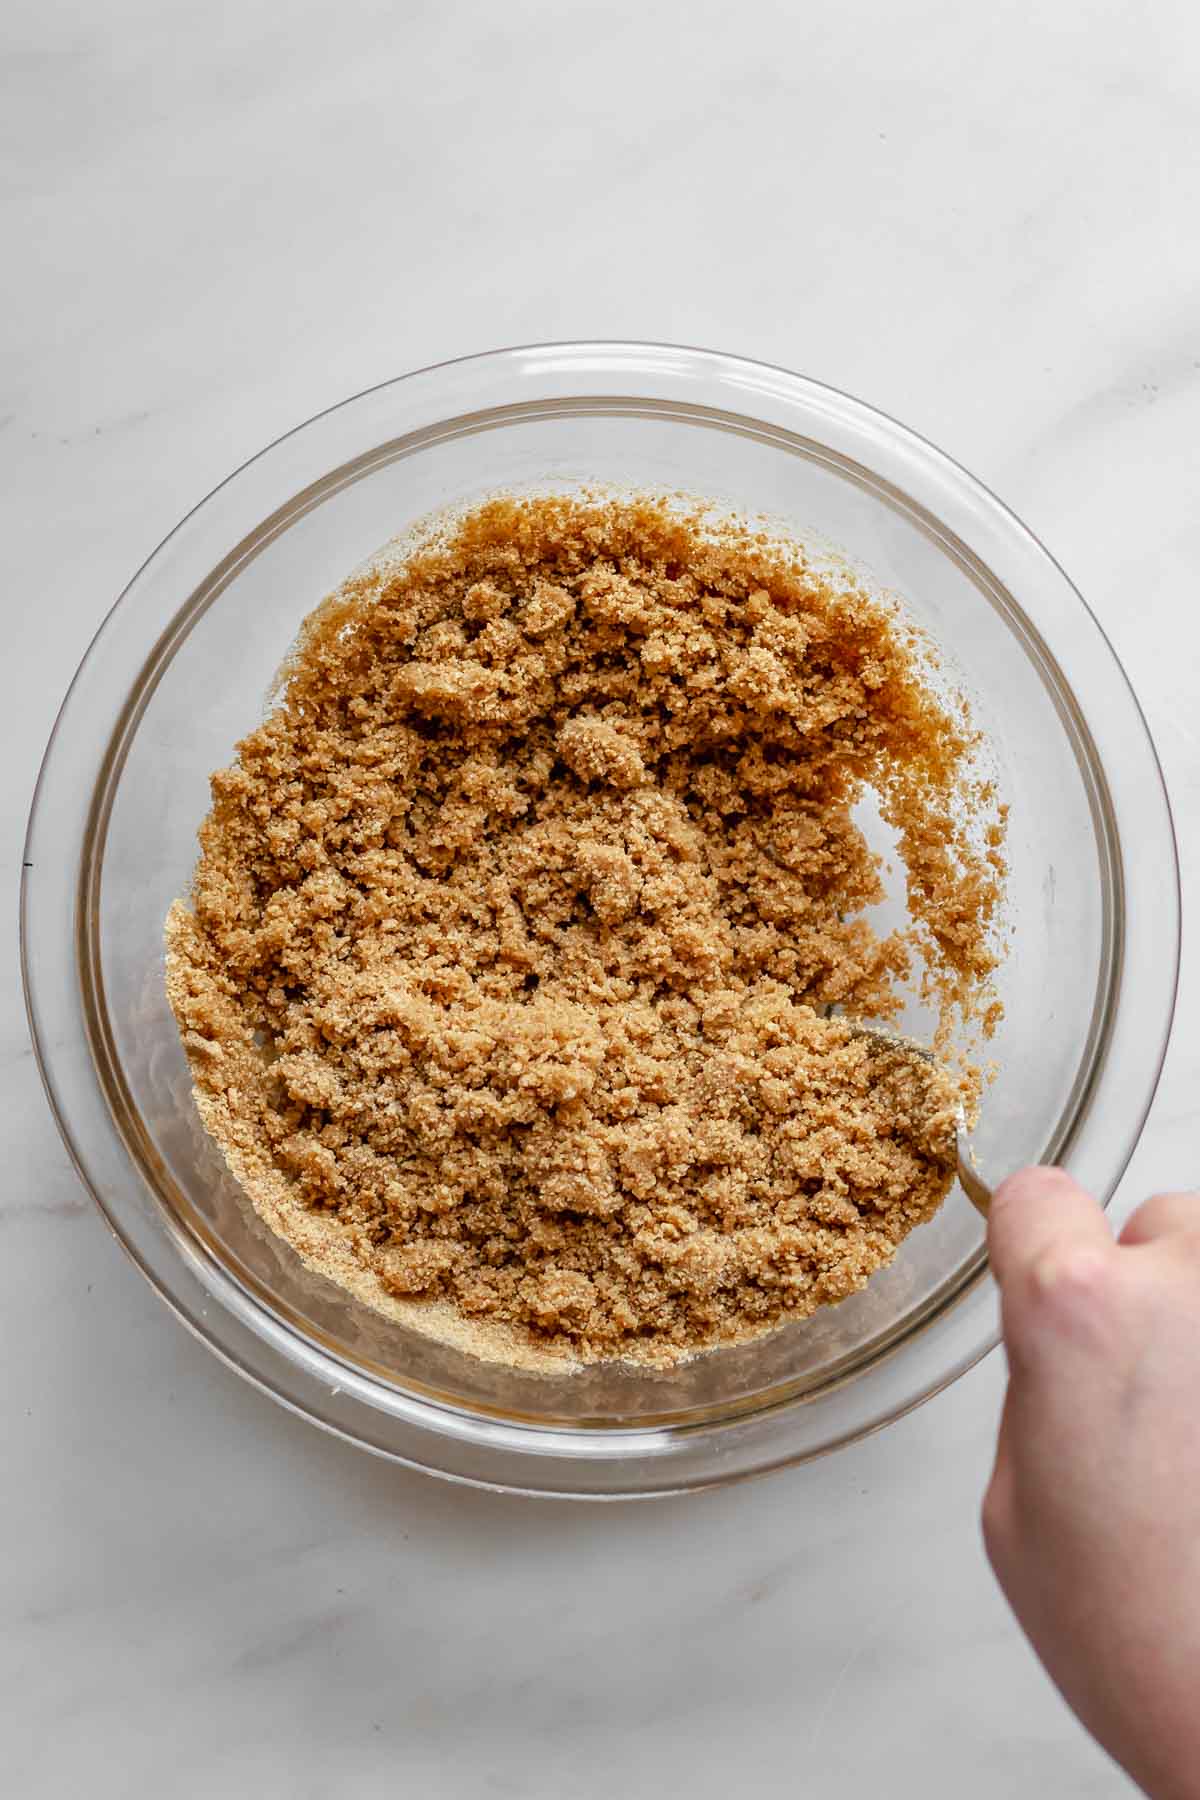 Graham cracker crumbs being stirred in a bowl.